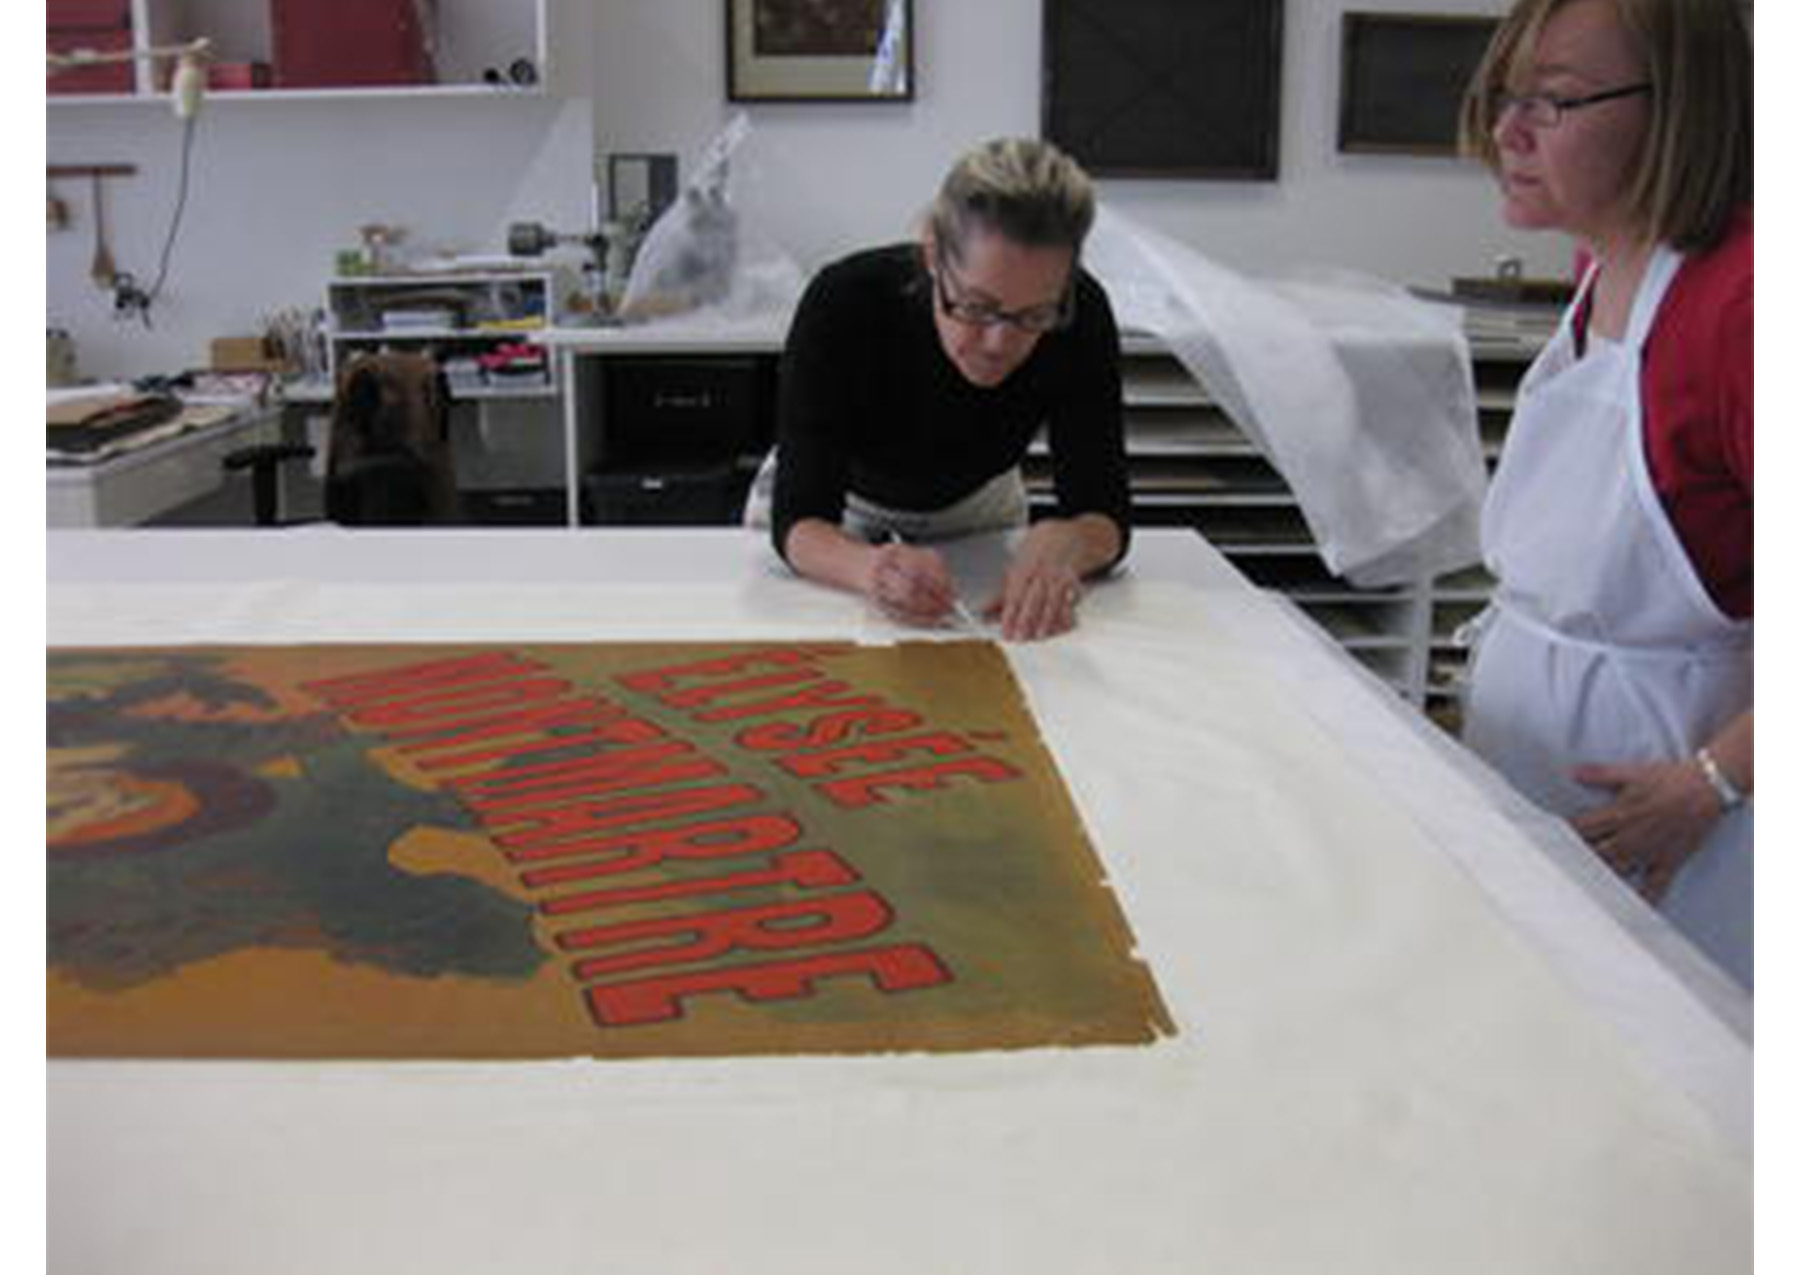 large white table with a poster spread across it; woman tends to a corner of the poster with tweezers; another woman stands over the table looking at the poster